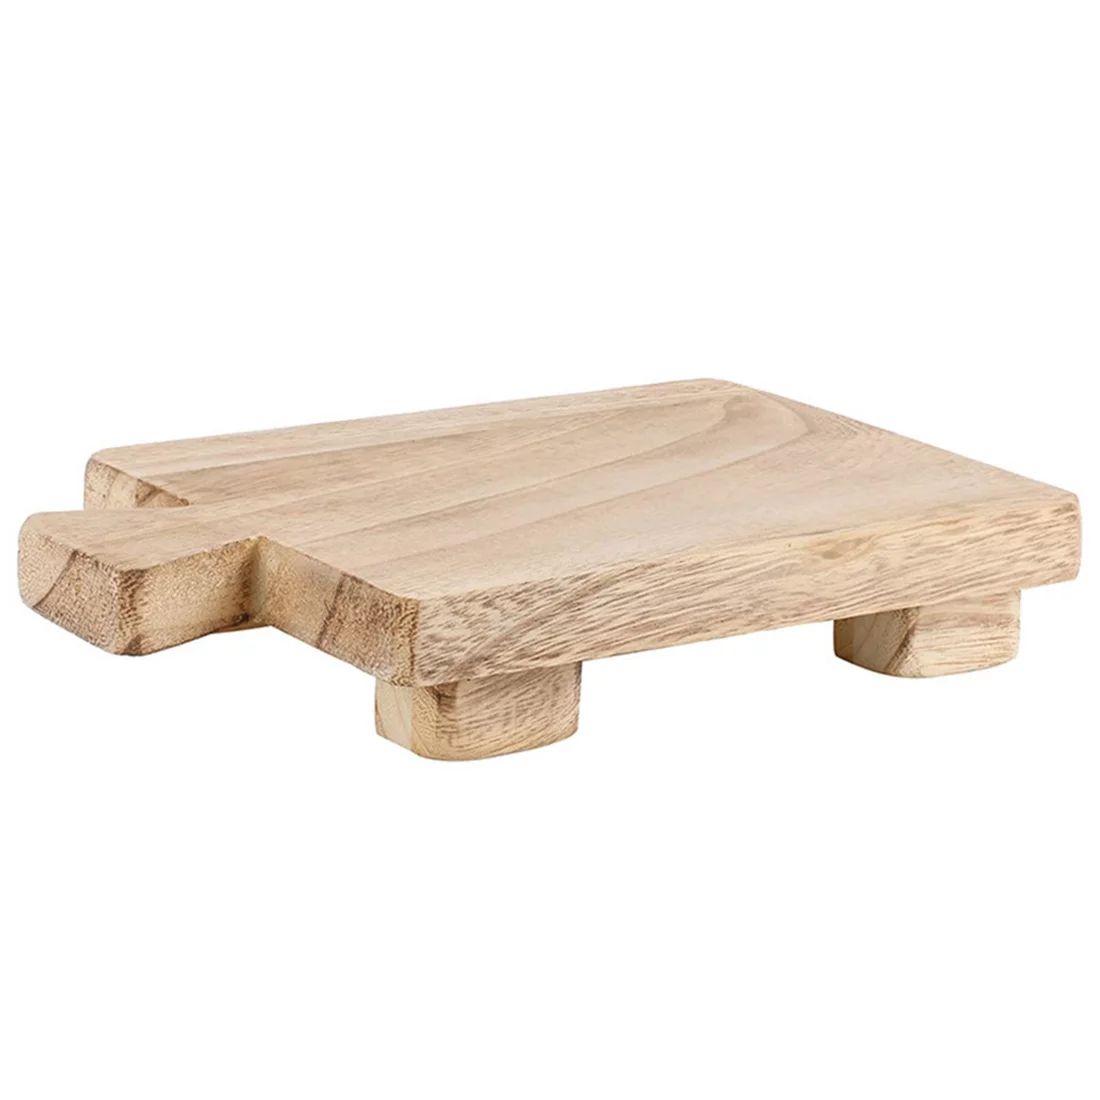 Rectangle Wood Pedestal with Handle, for Bathroom Wooden Tray Base | Walmart (US)